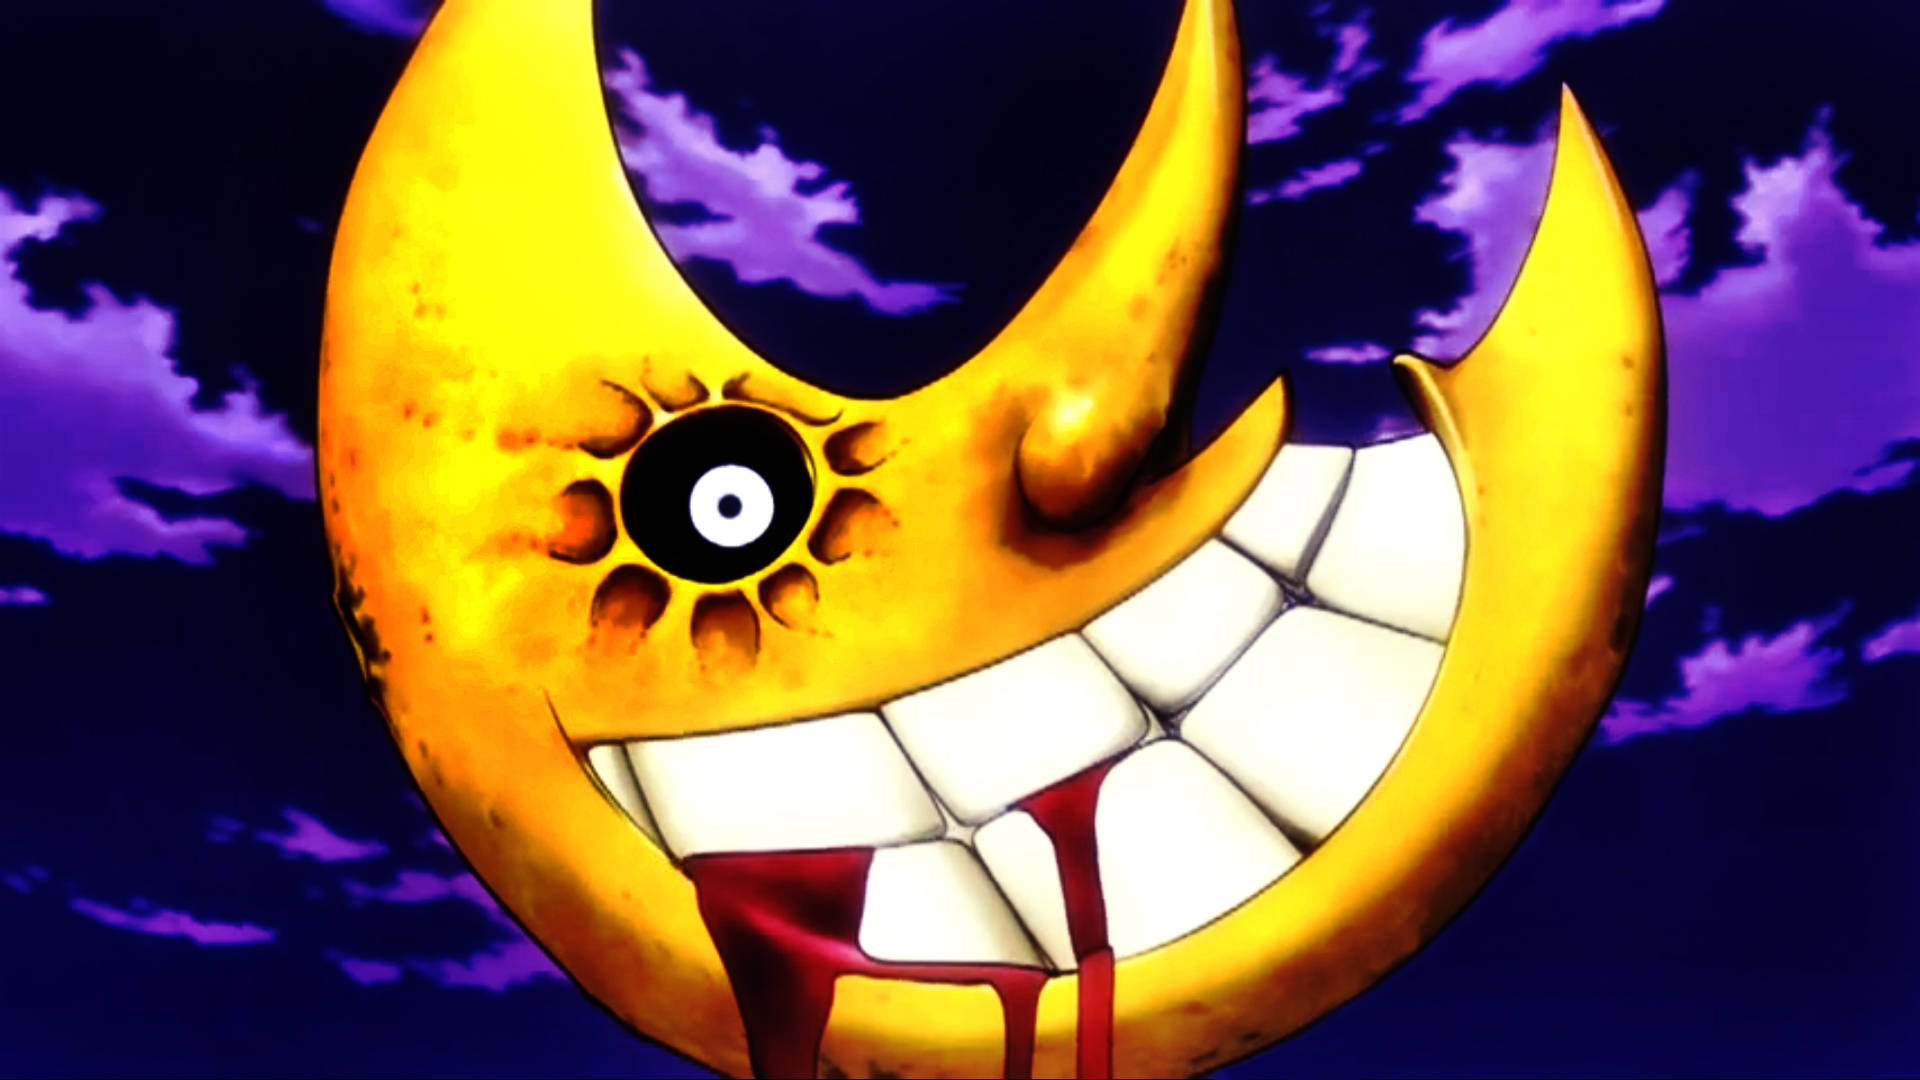 Close Up View of the Soul Eater Moon Wallpaper